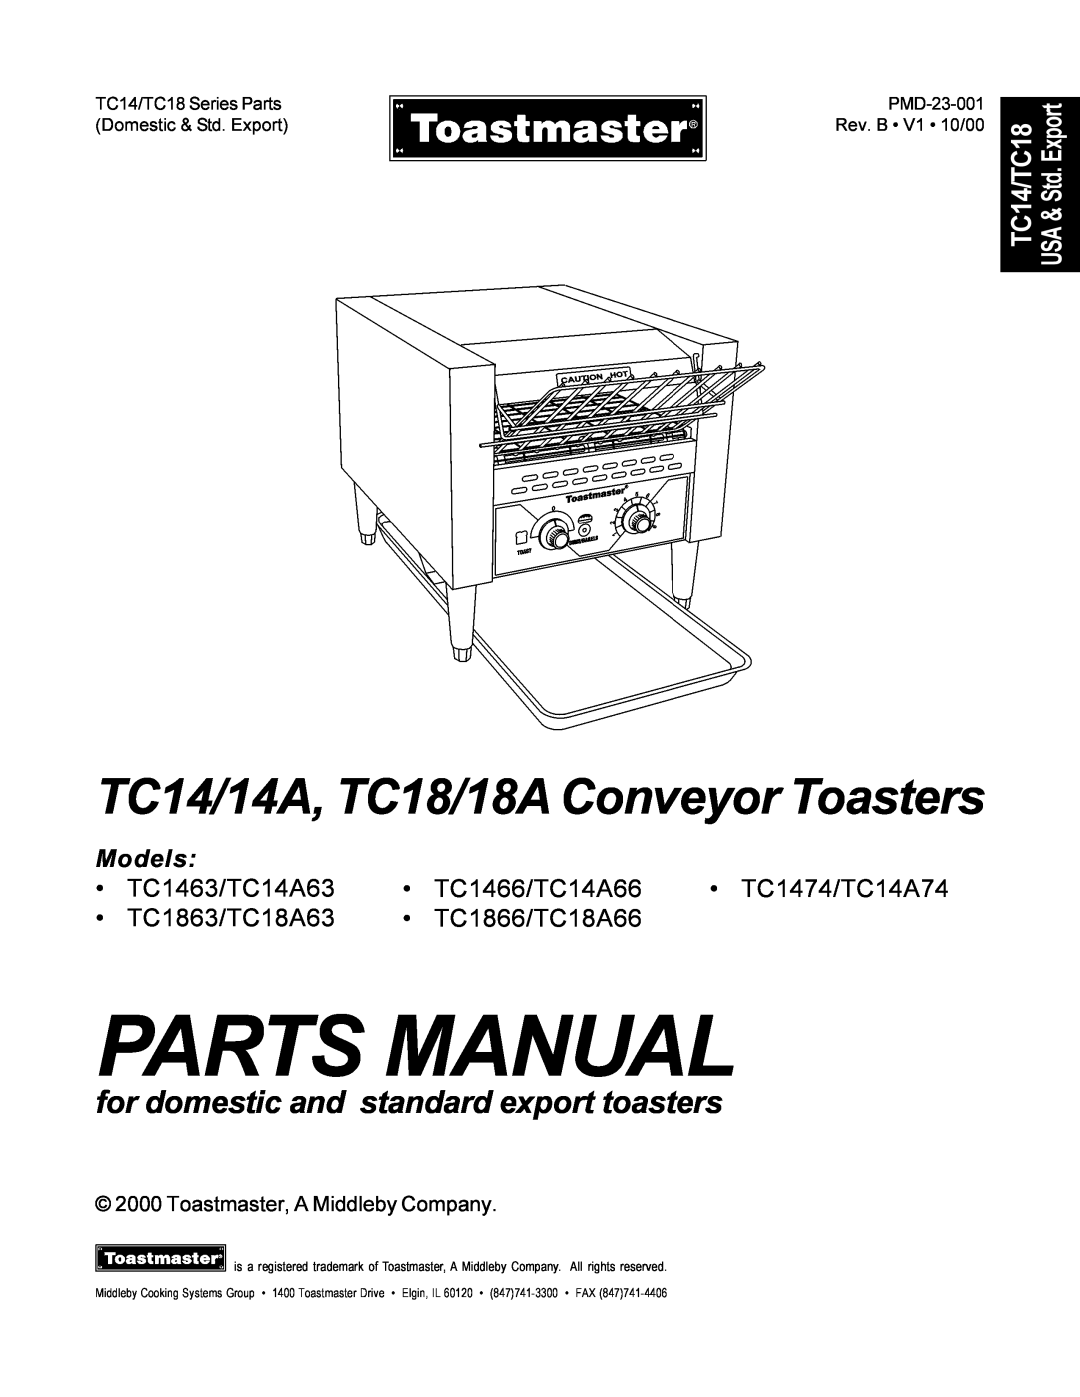 Toastmaster TC1474 manual Parts Manual, TC14/14A, TC18/18A Conveyor Toasters, for domestic and standard export toasters 